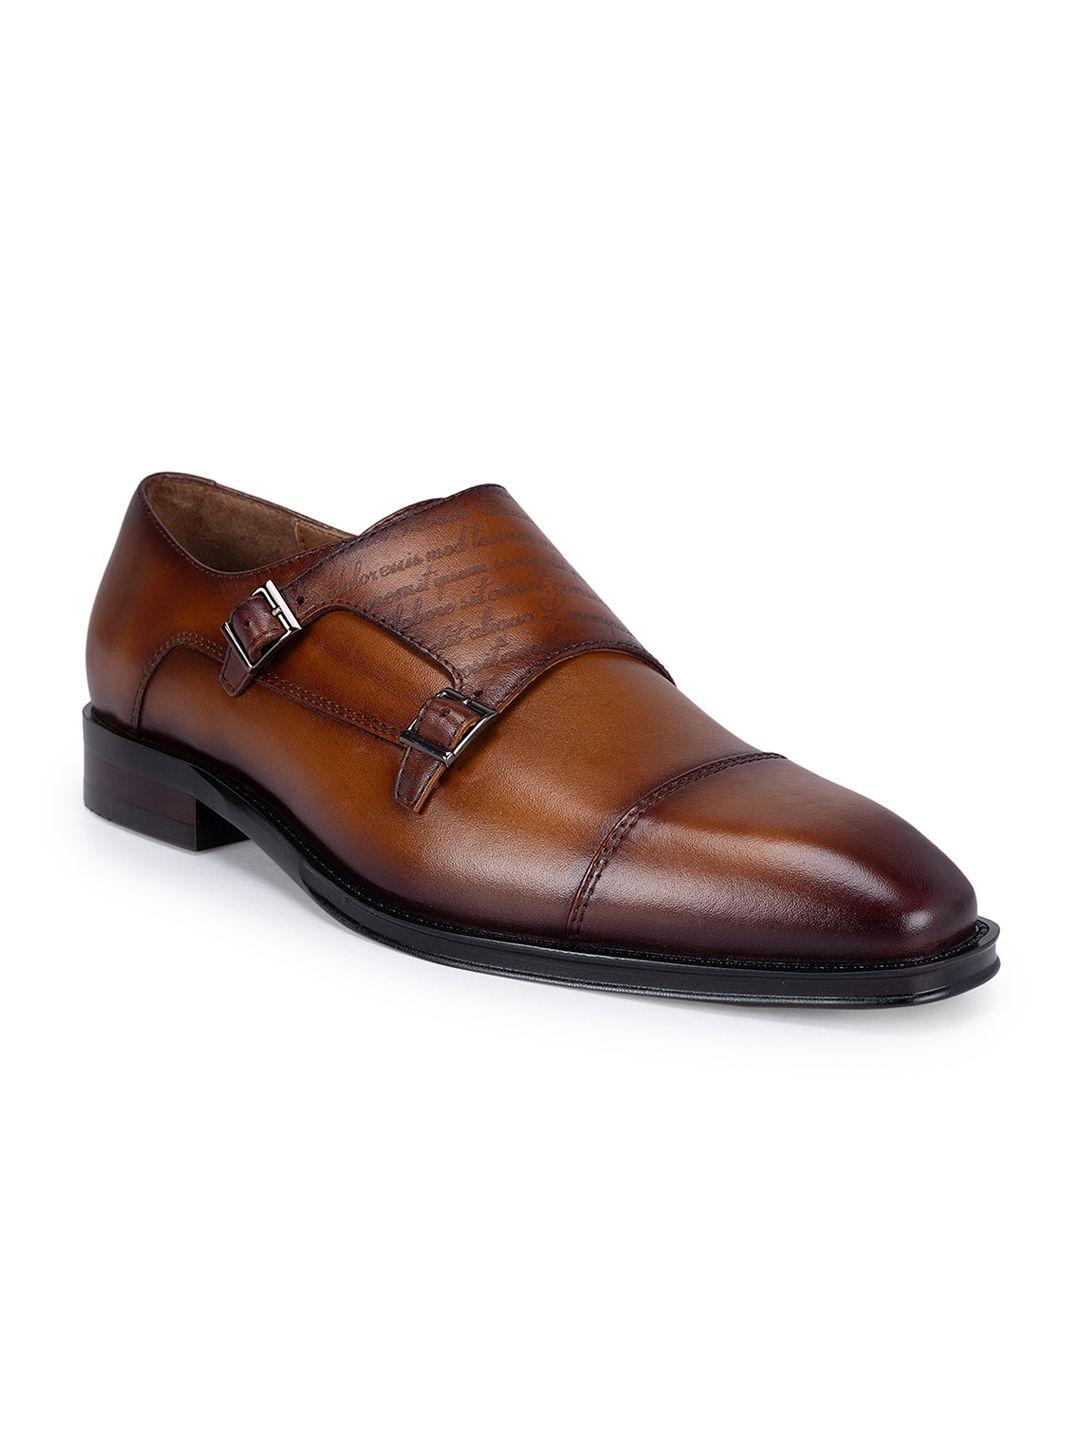 ROSSO BRUNELLO Men Textured Leather Formal Double Monk Shoes